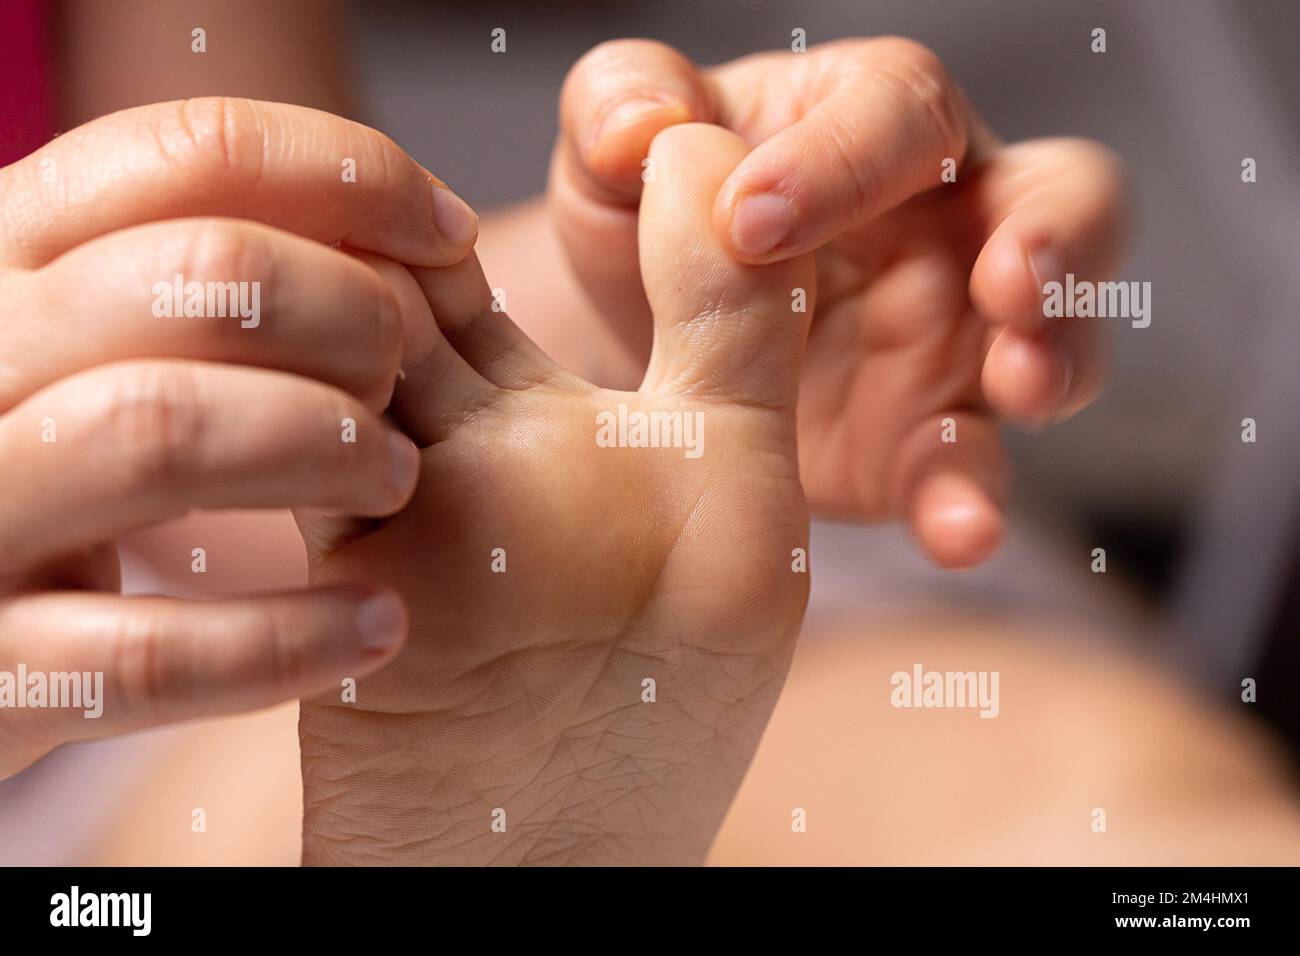 Close-up of the hands of a nurse inspecting the foot of a patient with athlete's foot. Fungal infection between the toes that causes itching, foul odo Stock Photo